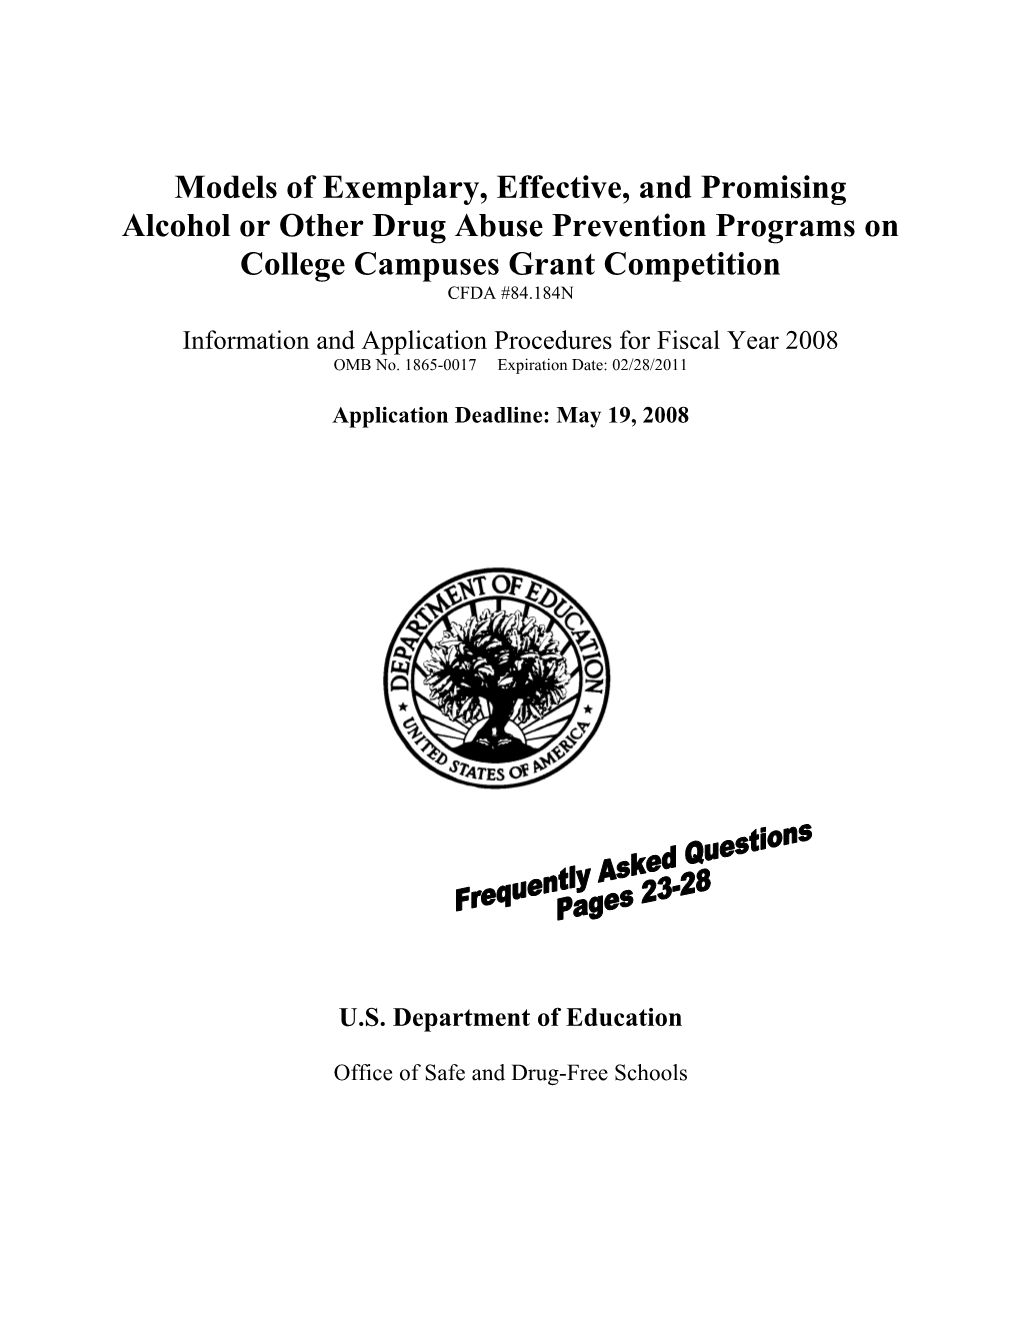 Models of Exemplary, Effective, and Promising Alcohol Or Other Drug Abuse Prevention Programs